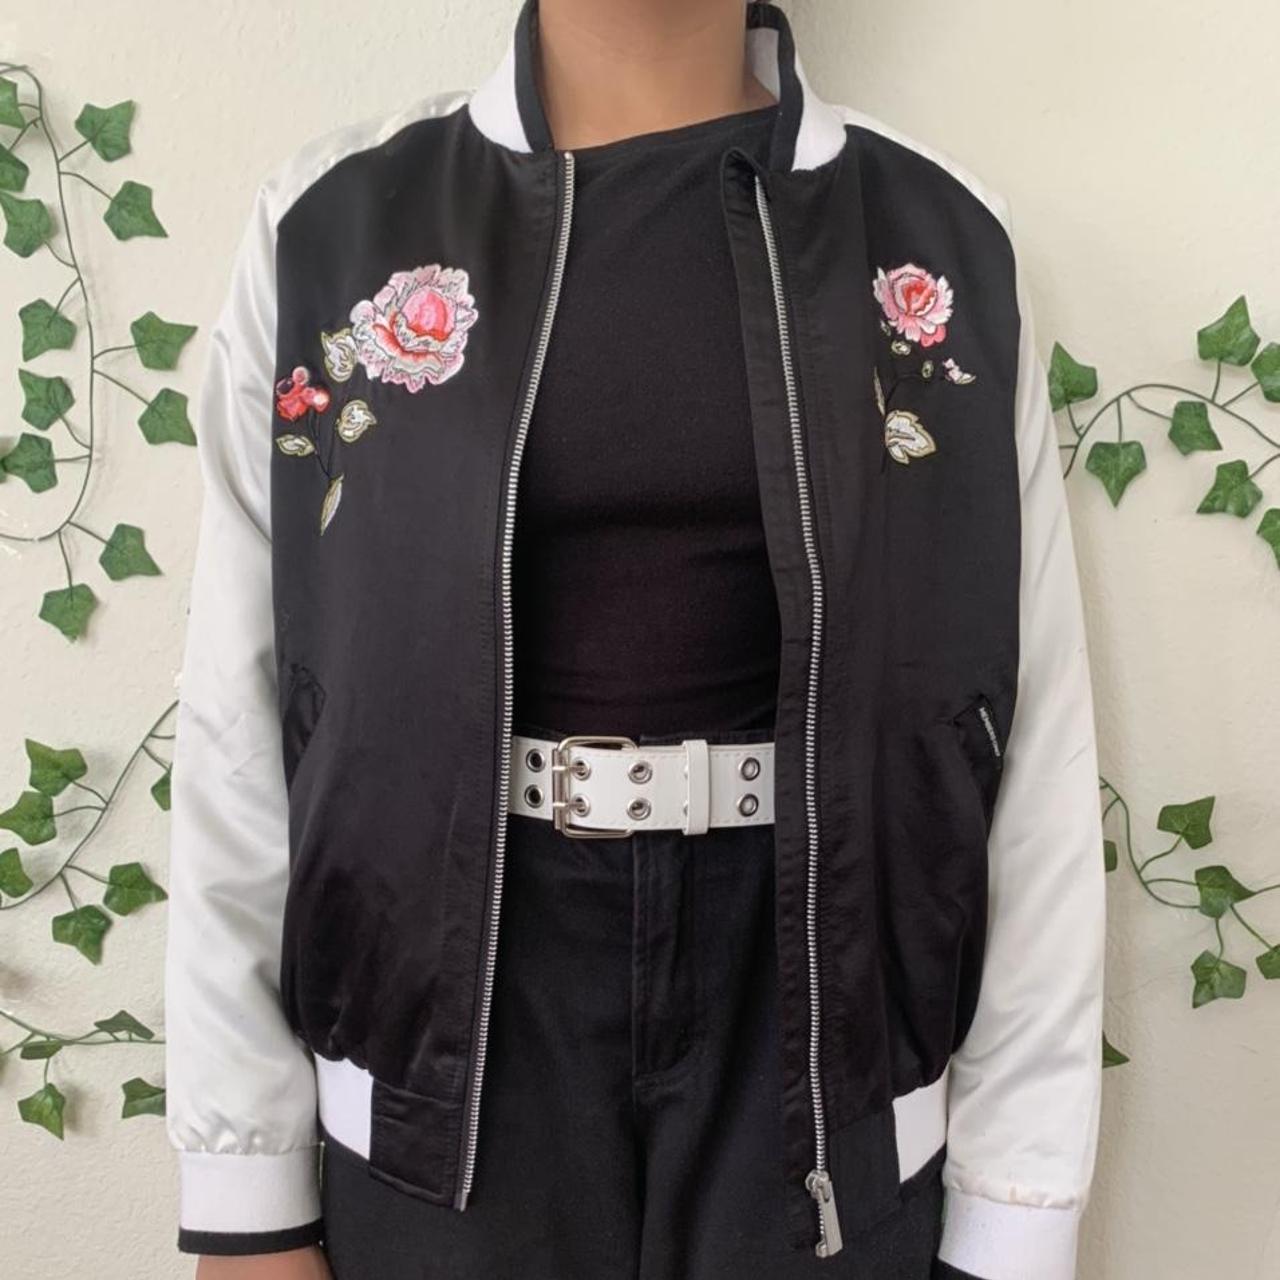 Members Only Women's Black and White Jacket